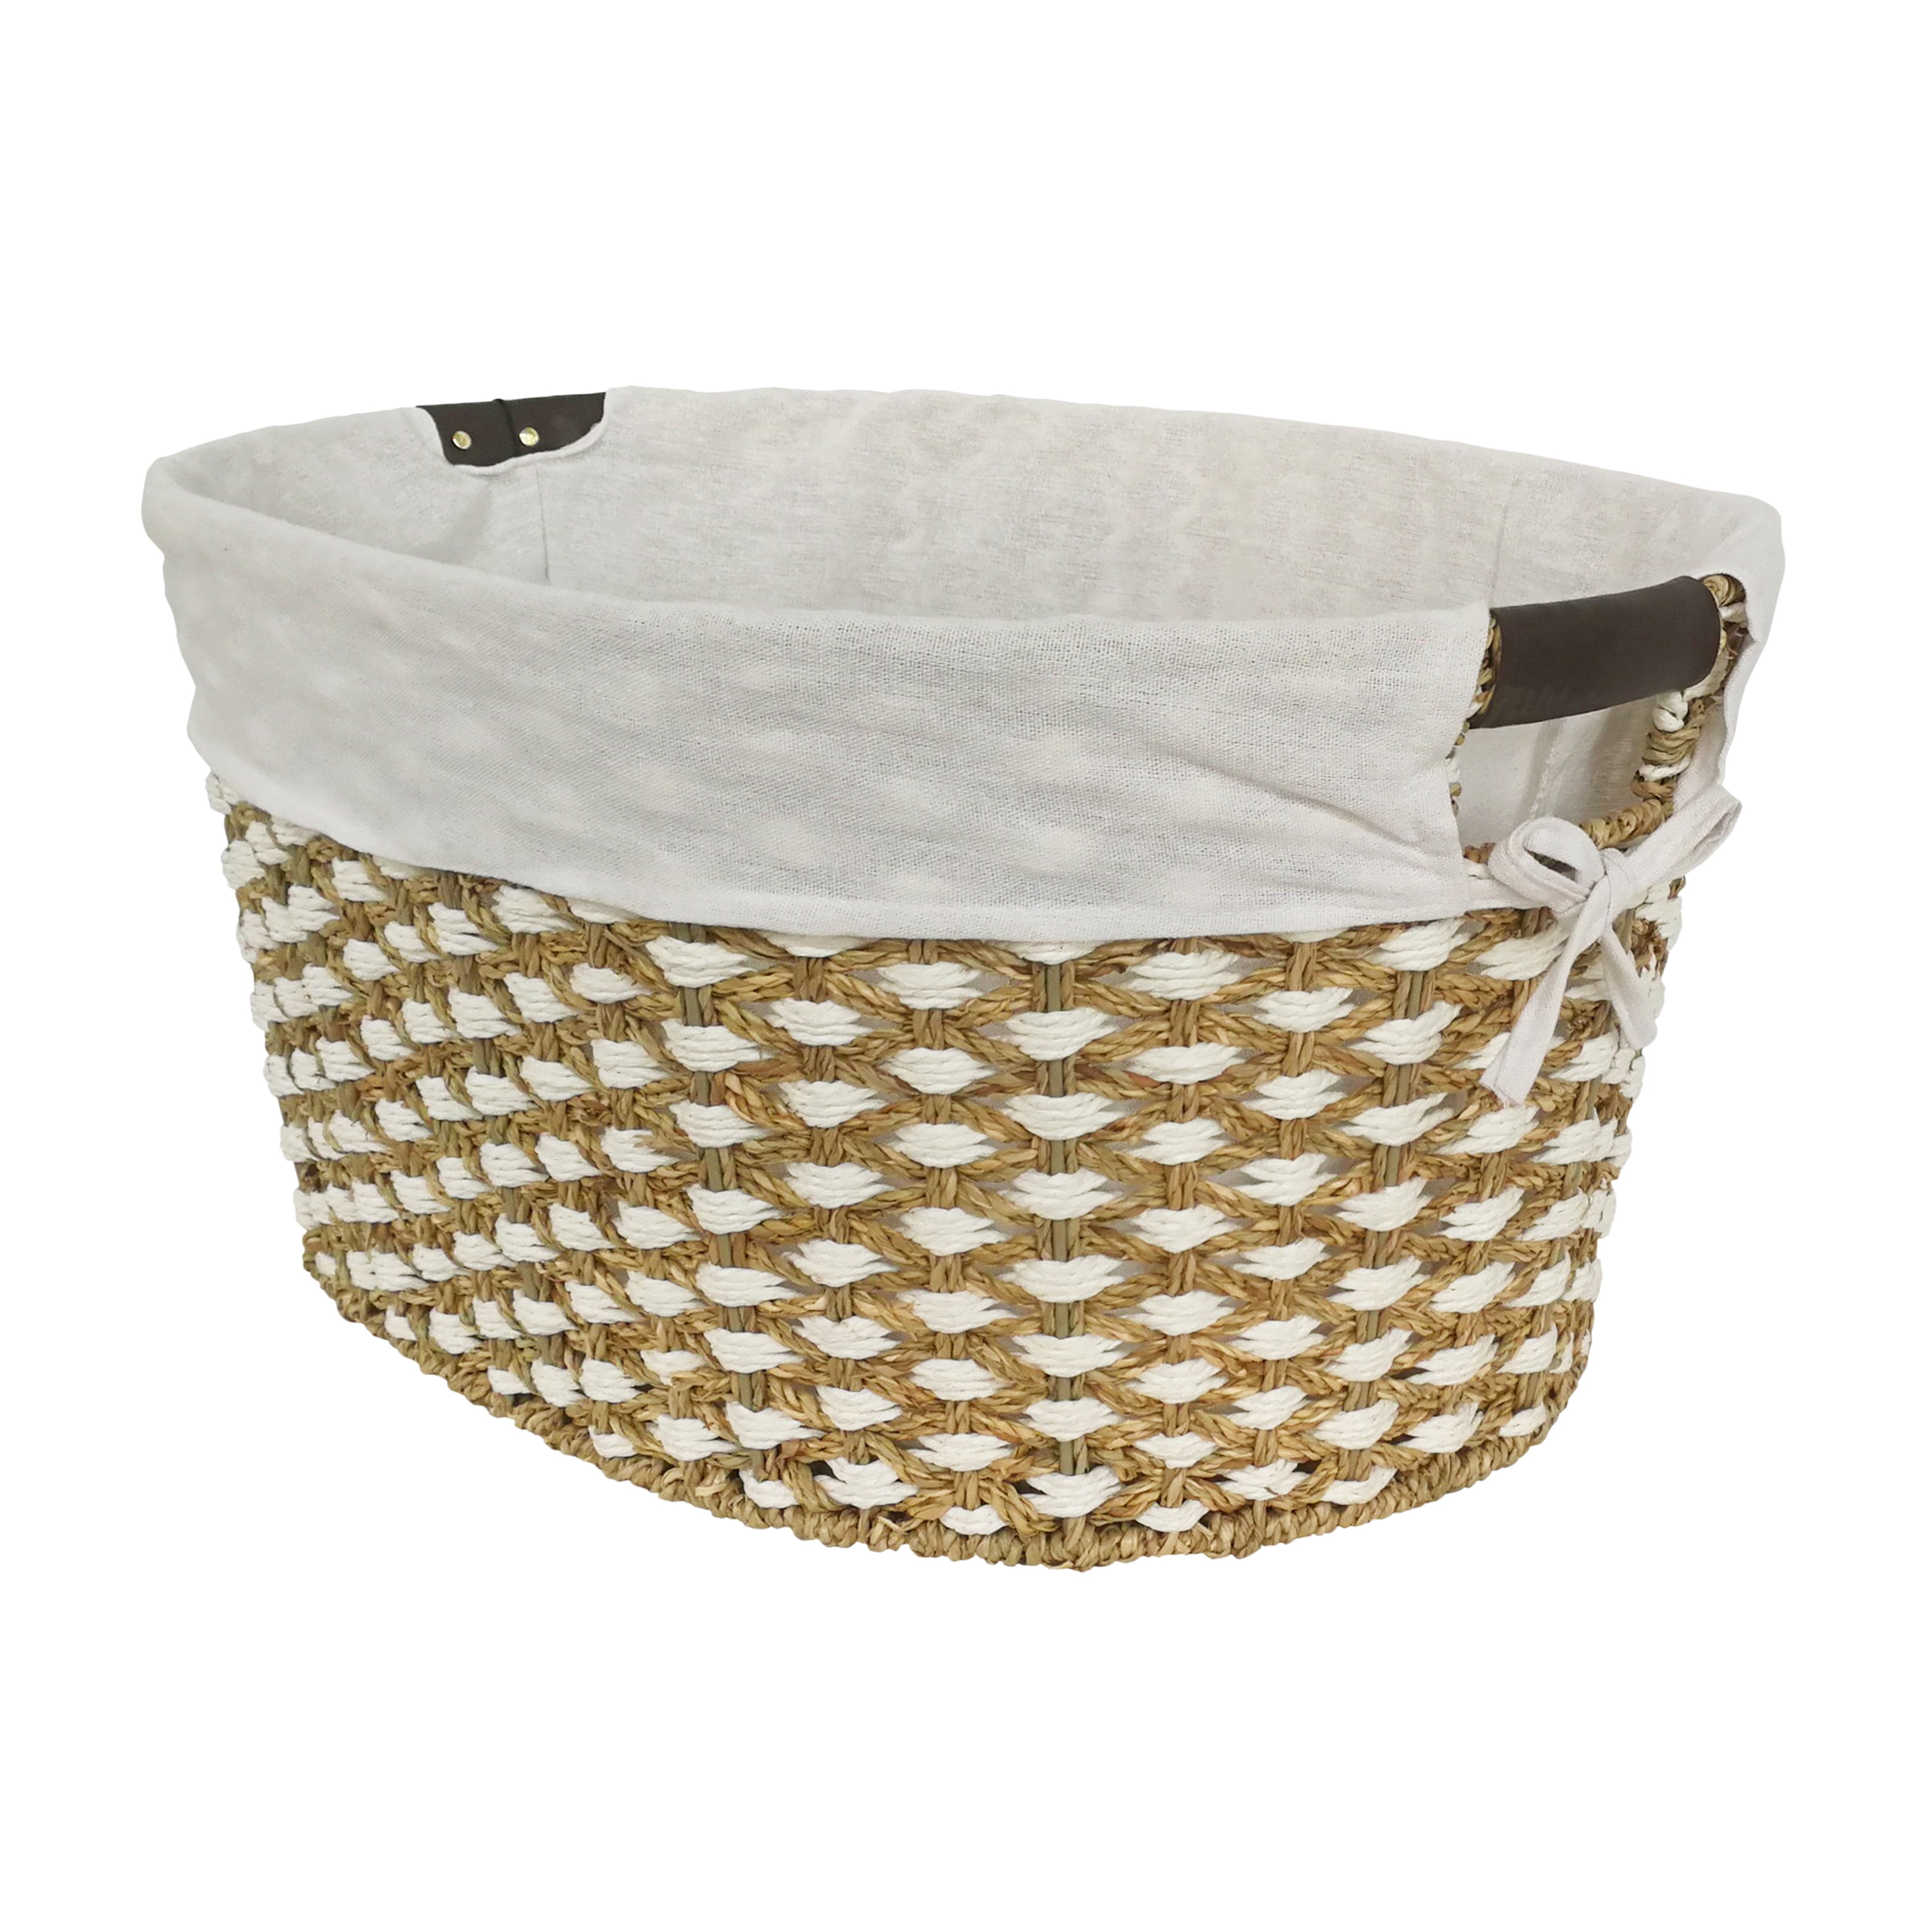 Storage Basket Laundry Basket with Lid Cover Seagrass 4-Square